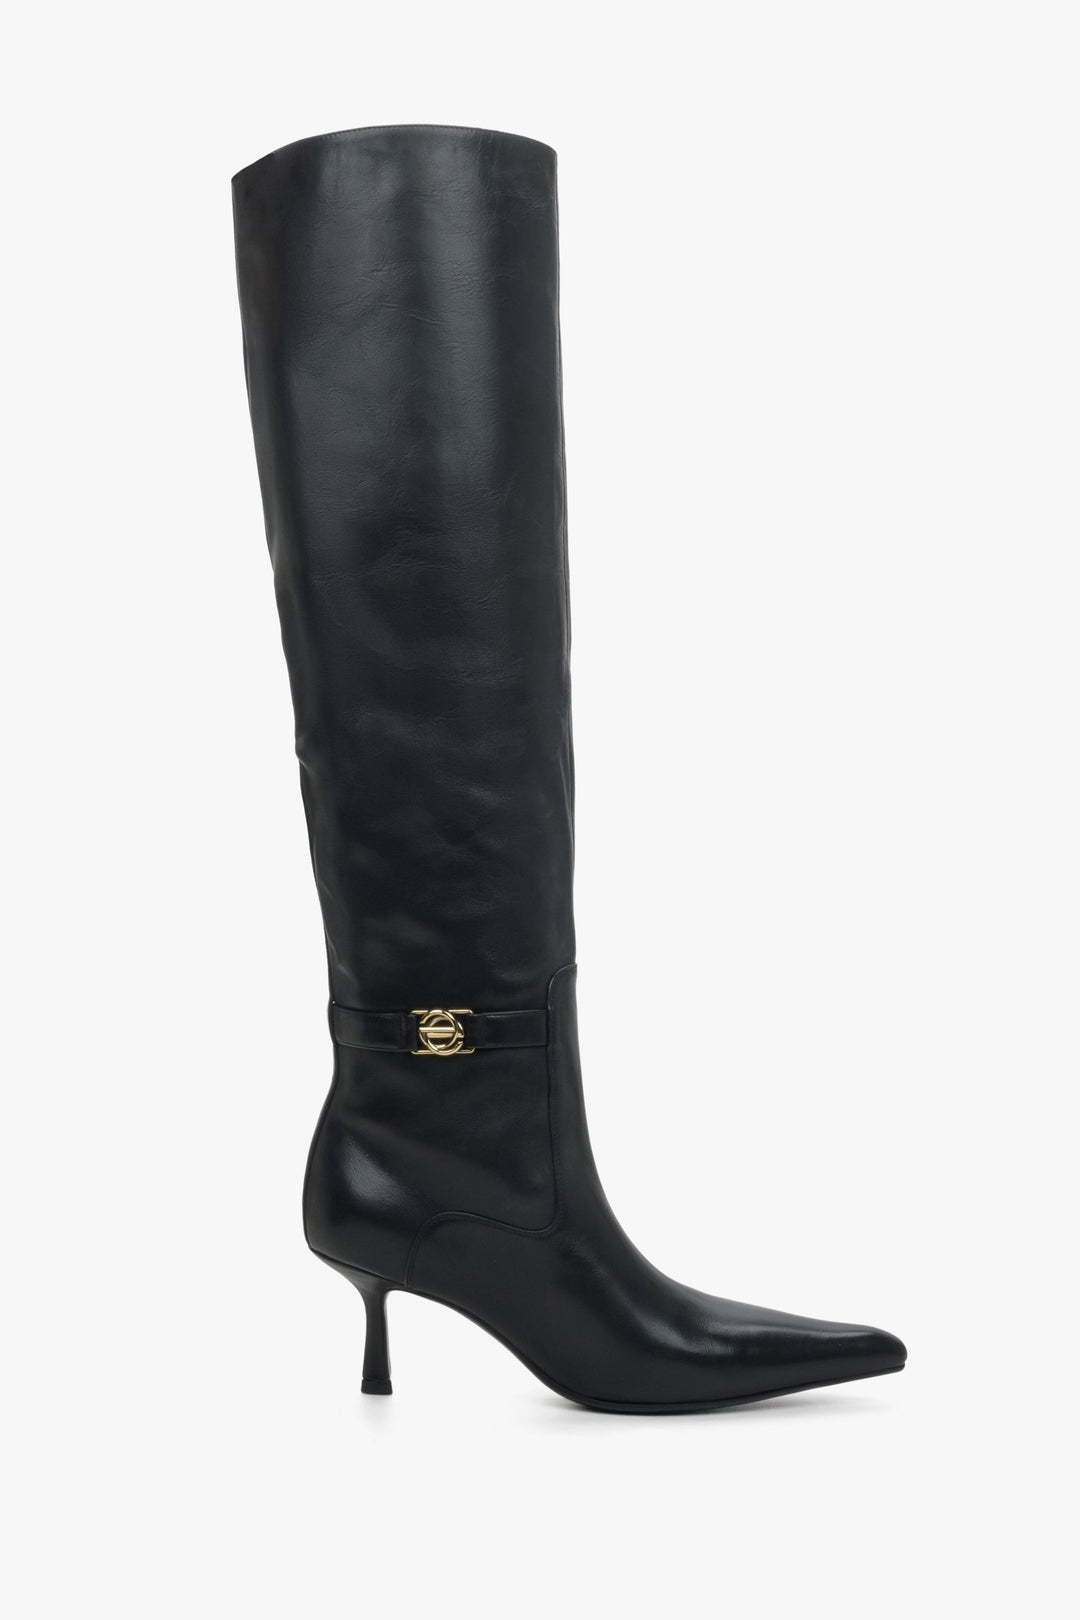 Women's High Low Heel Black Boots made of Genuine Leather Estro ER00114258.